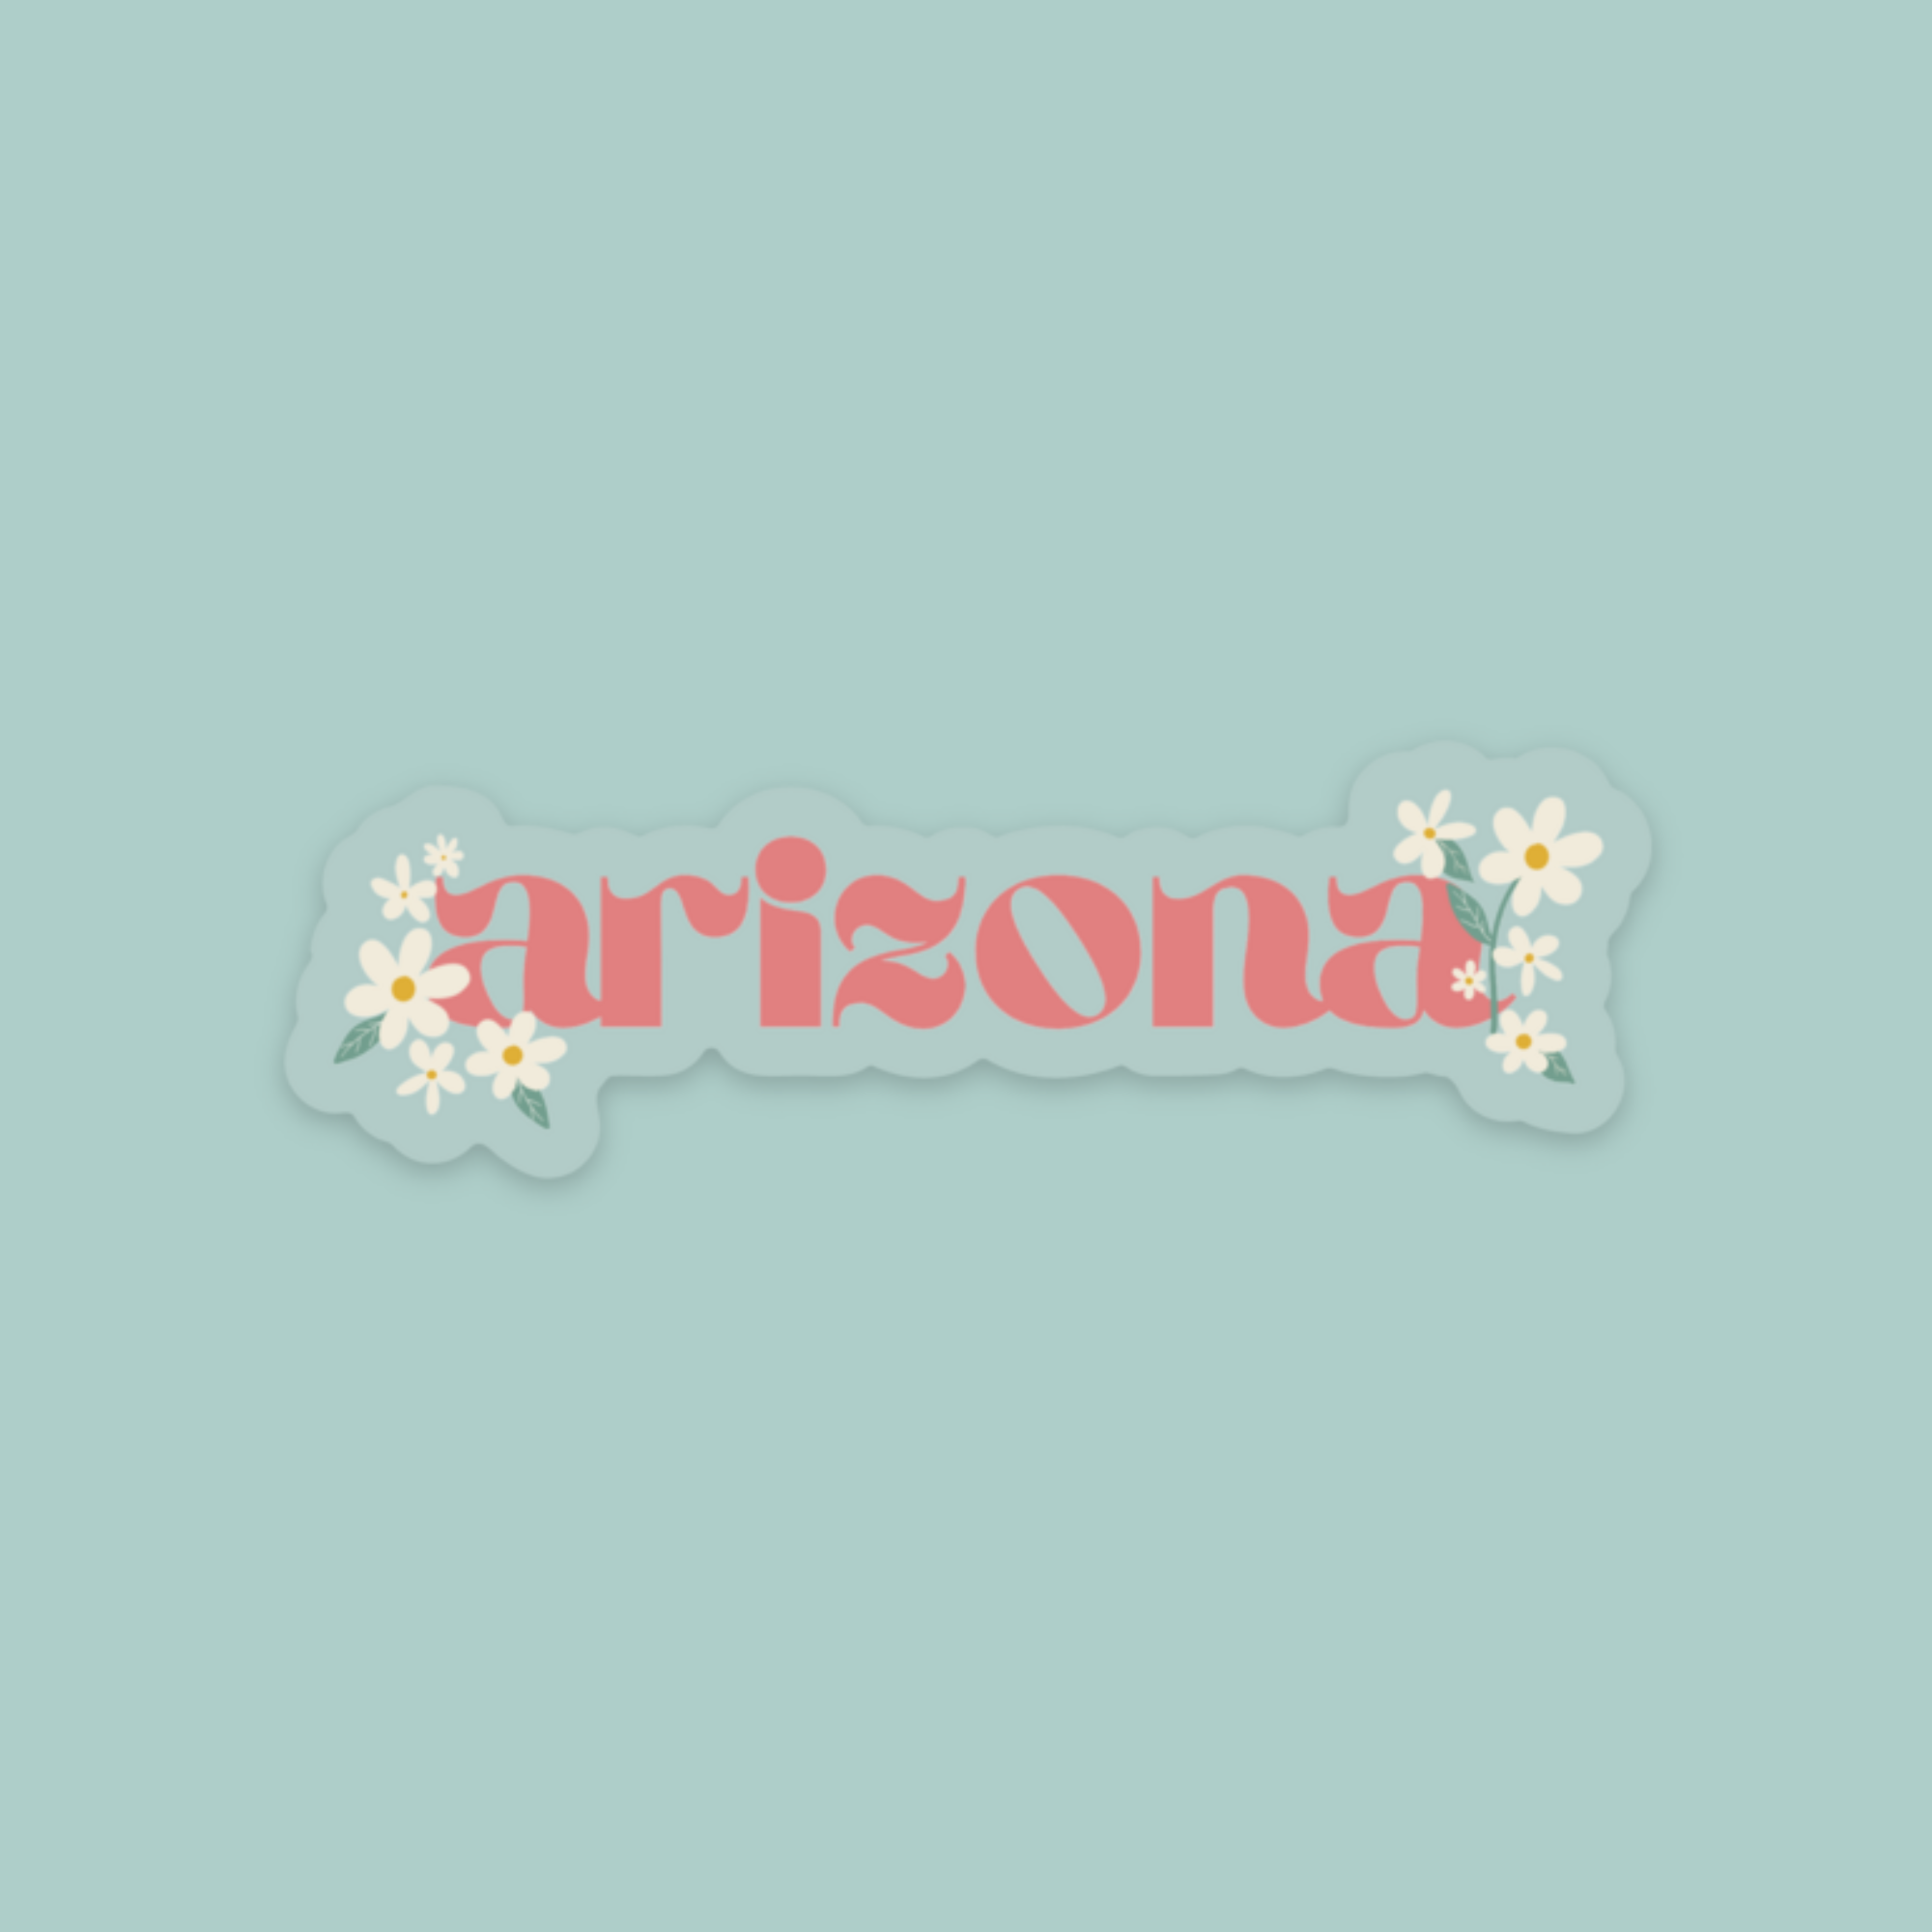 Die cut sticker with clear back and the word "arizona" surrounded by daisies shown on an aqua background color to display transparency